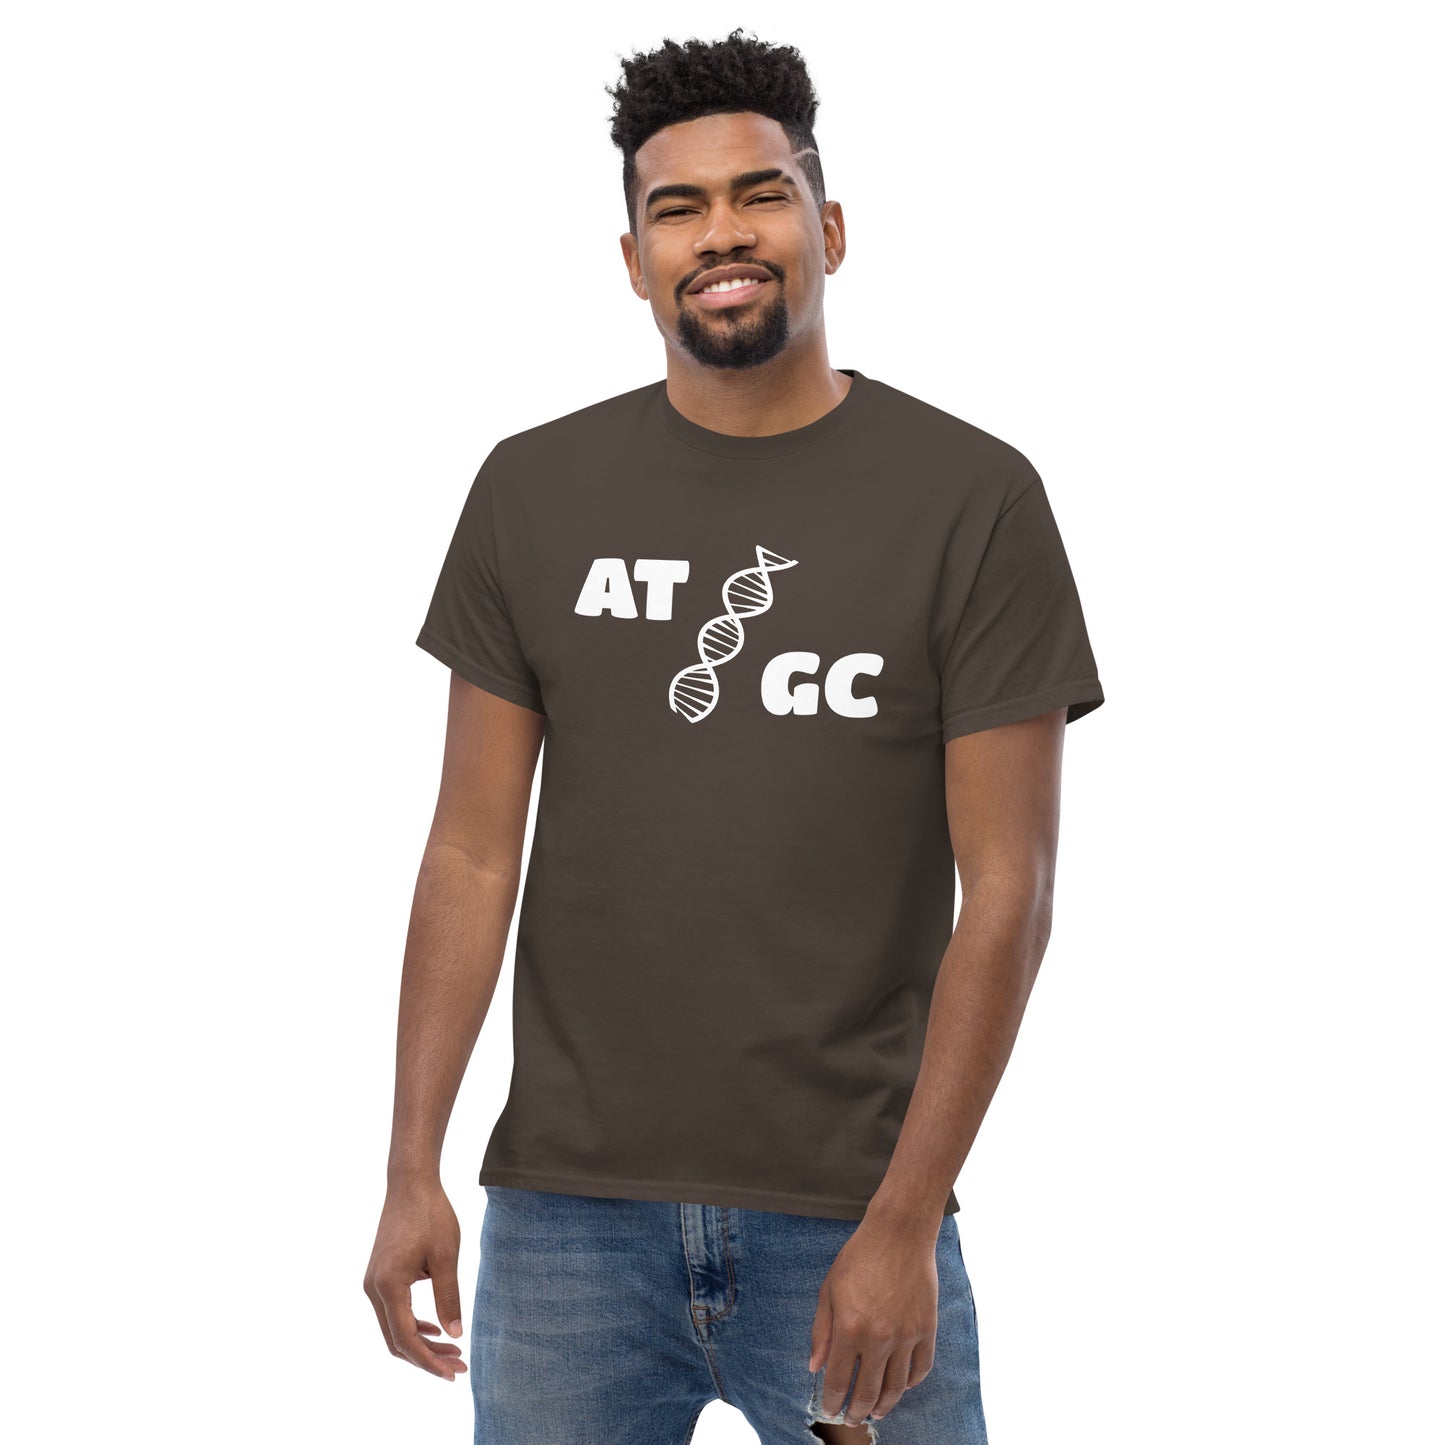 Men with dark brown t-shirt with image of a DNA string and the text "ATGC"